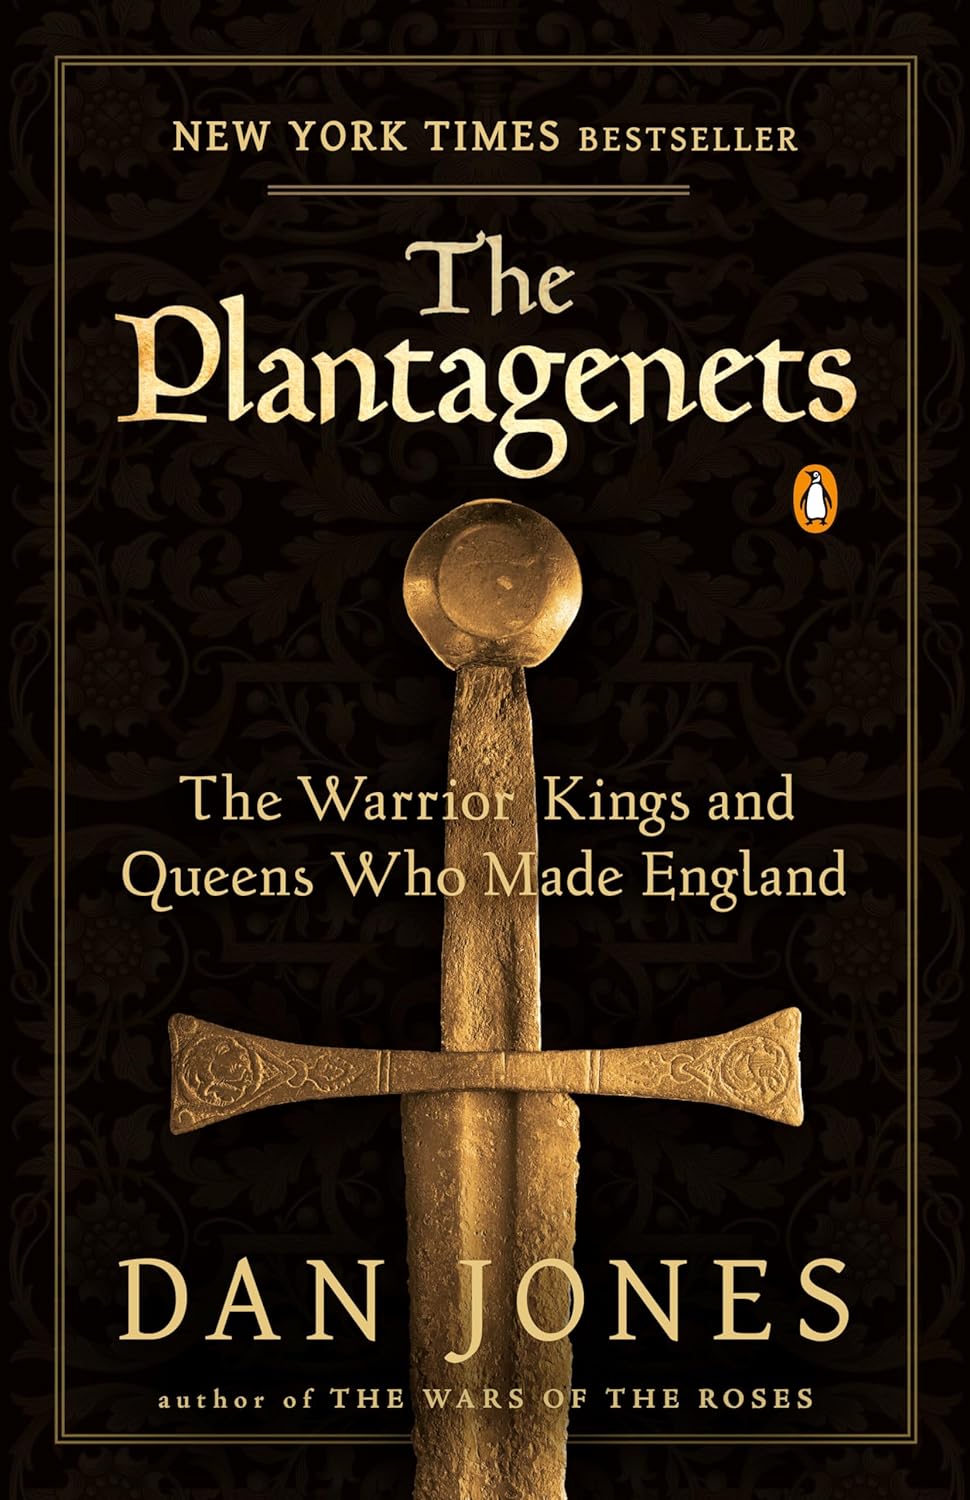 The Plantagenets The Warrior Kings and Queens Who Made England by Dan Jones